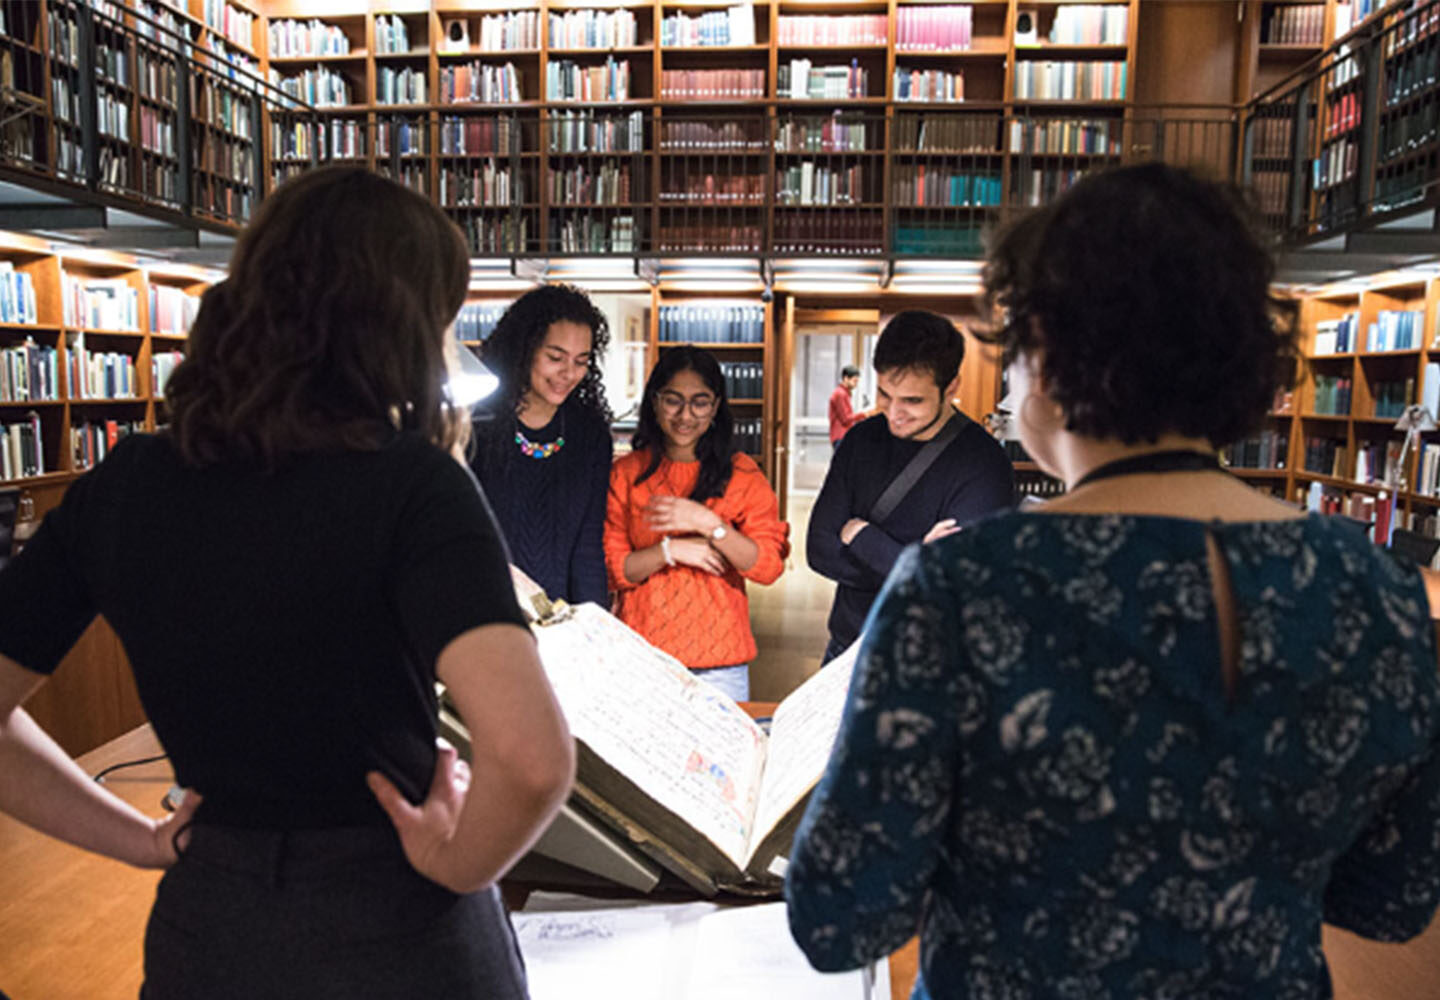 College Night at The Morgan Library and Museum